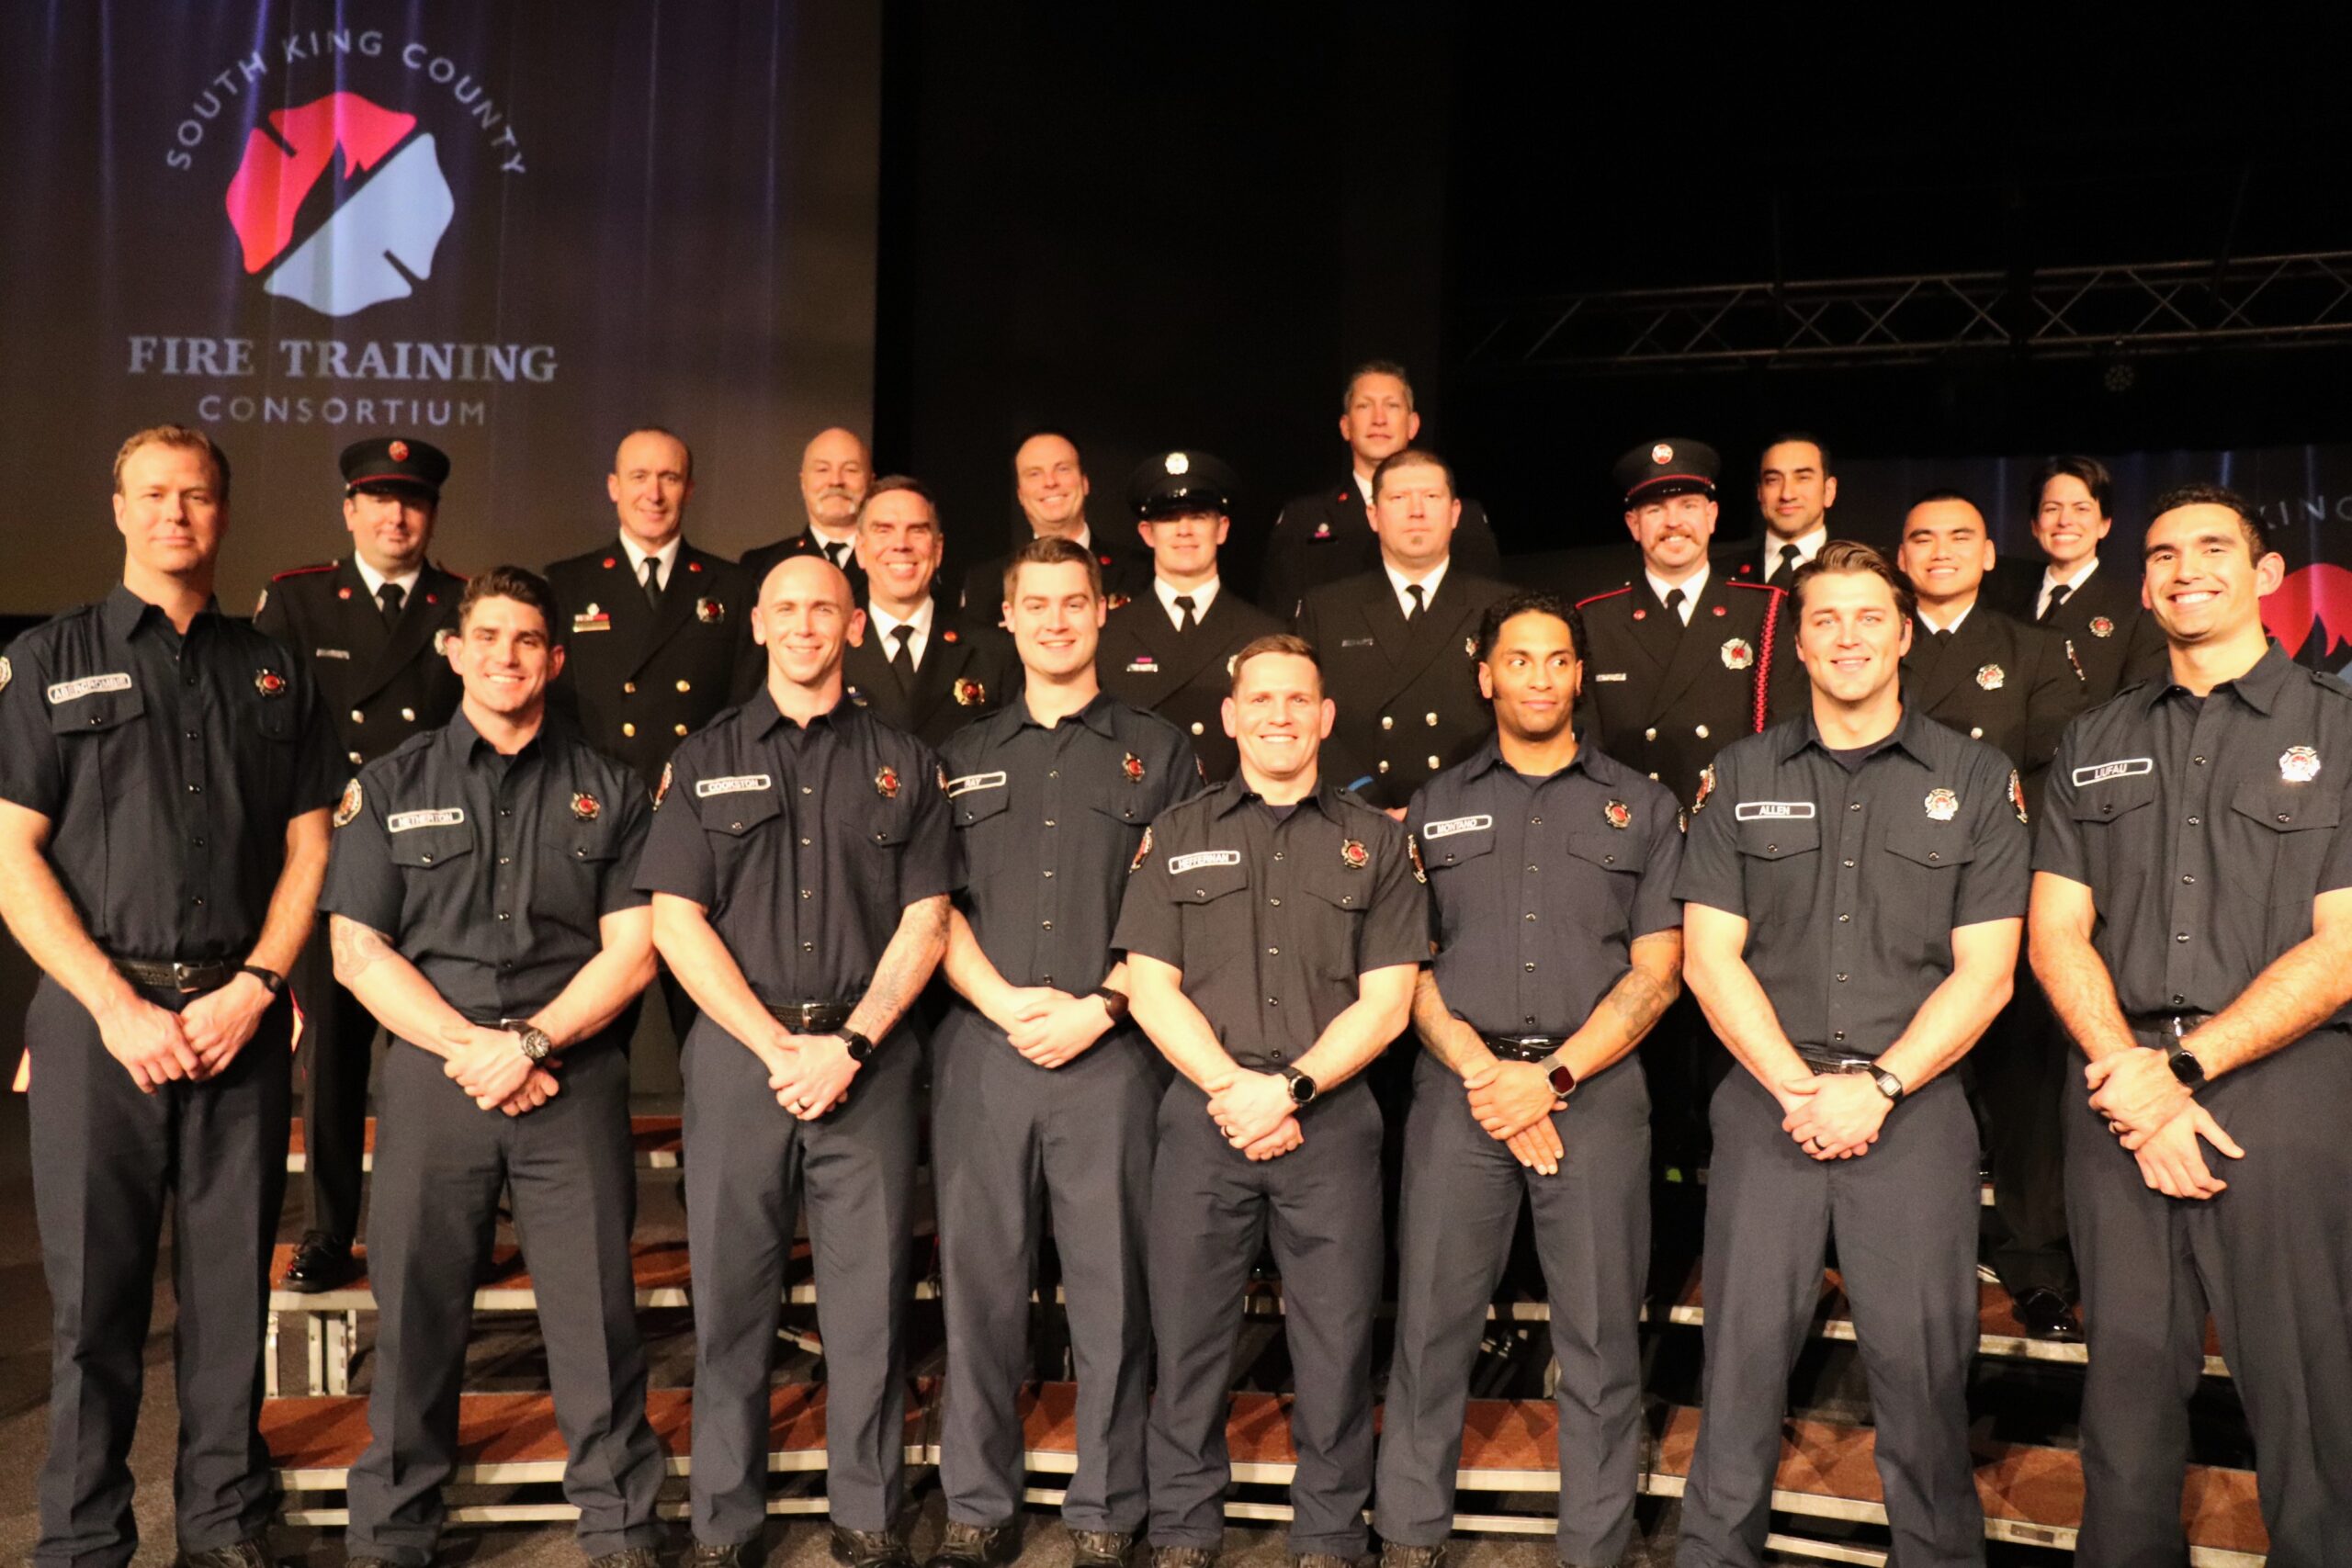 A group of firefighters posing for a photo.